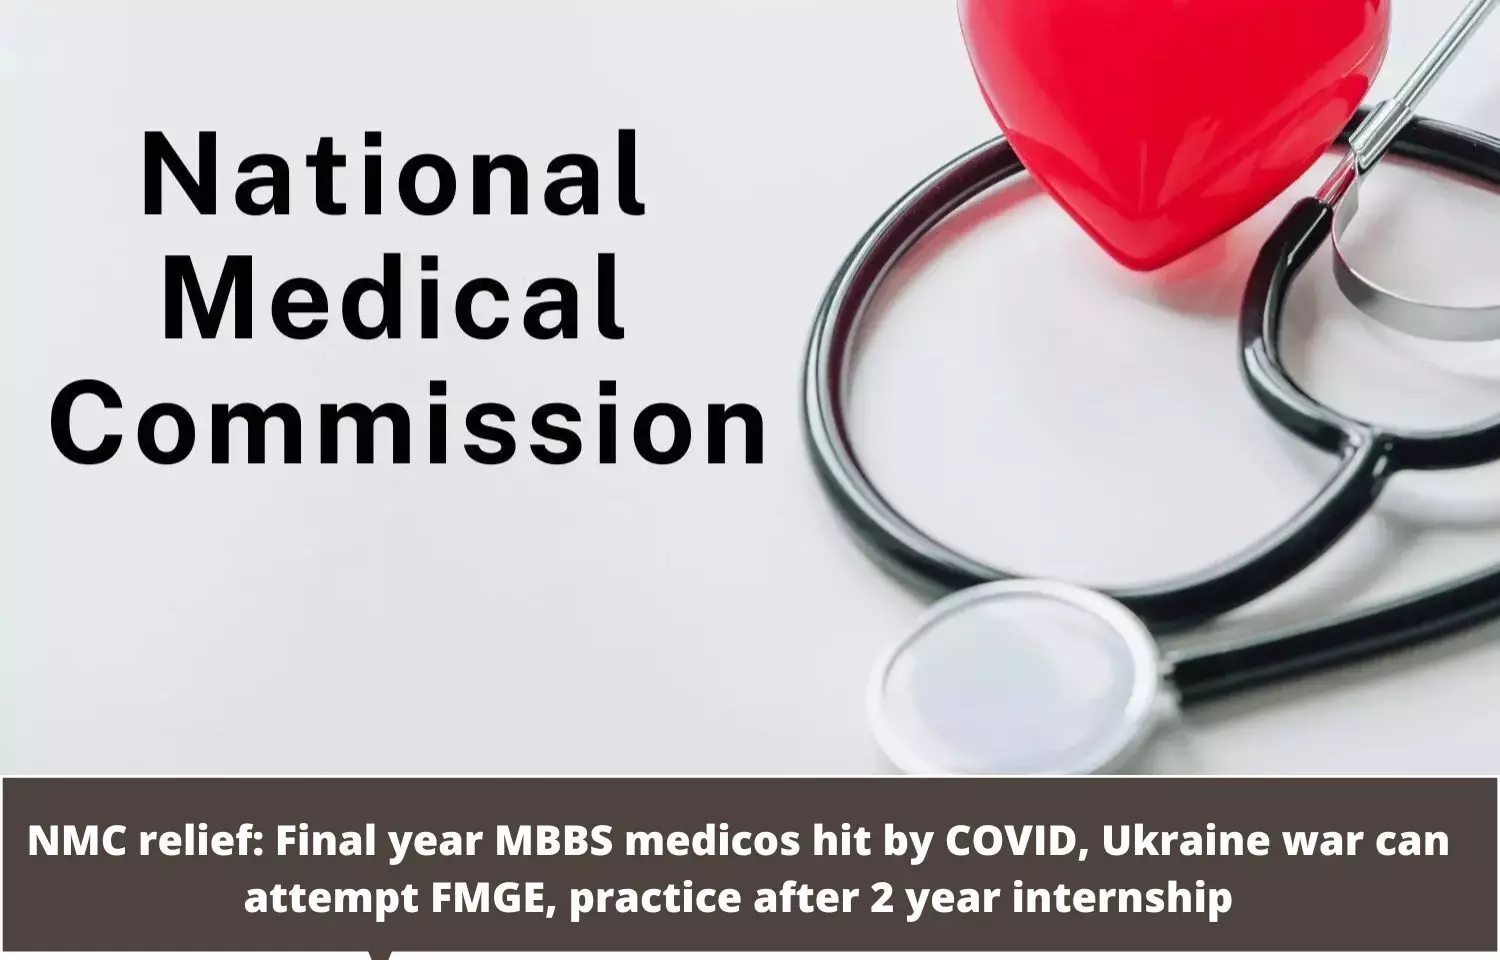 NMC frames scheme to give relief to final year medical students who returned from Ukraine, China